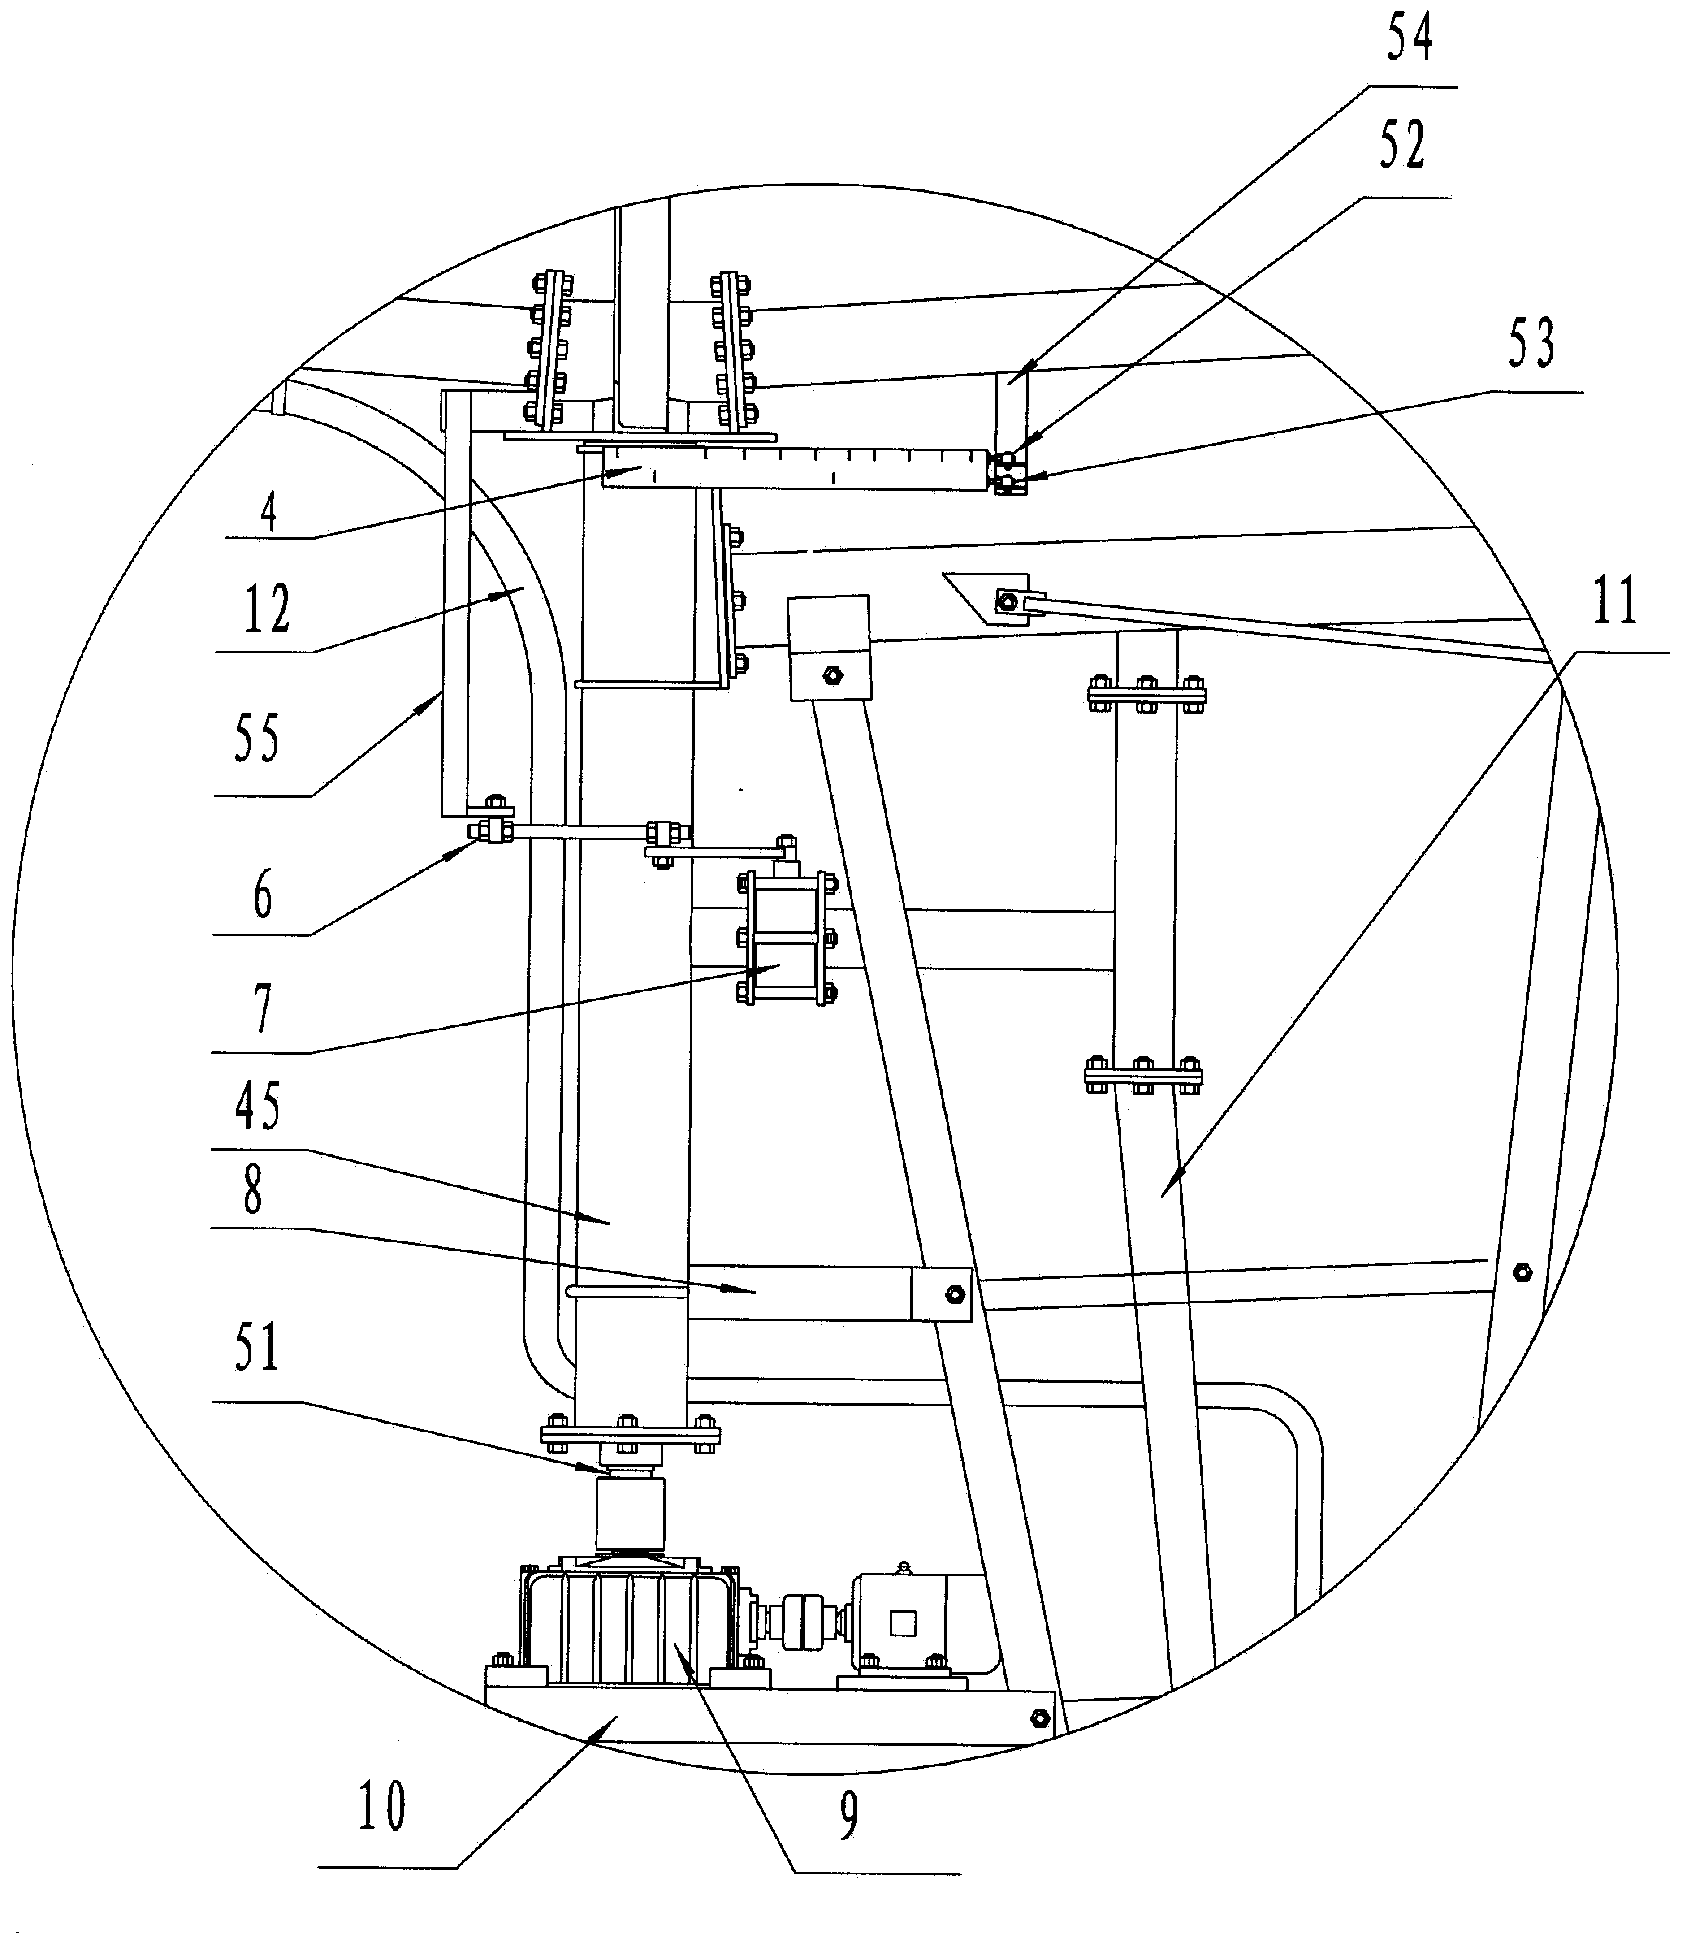 Electric translation multi-functional jet-irrigating machine with circular rotation cantilever